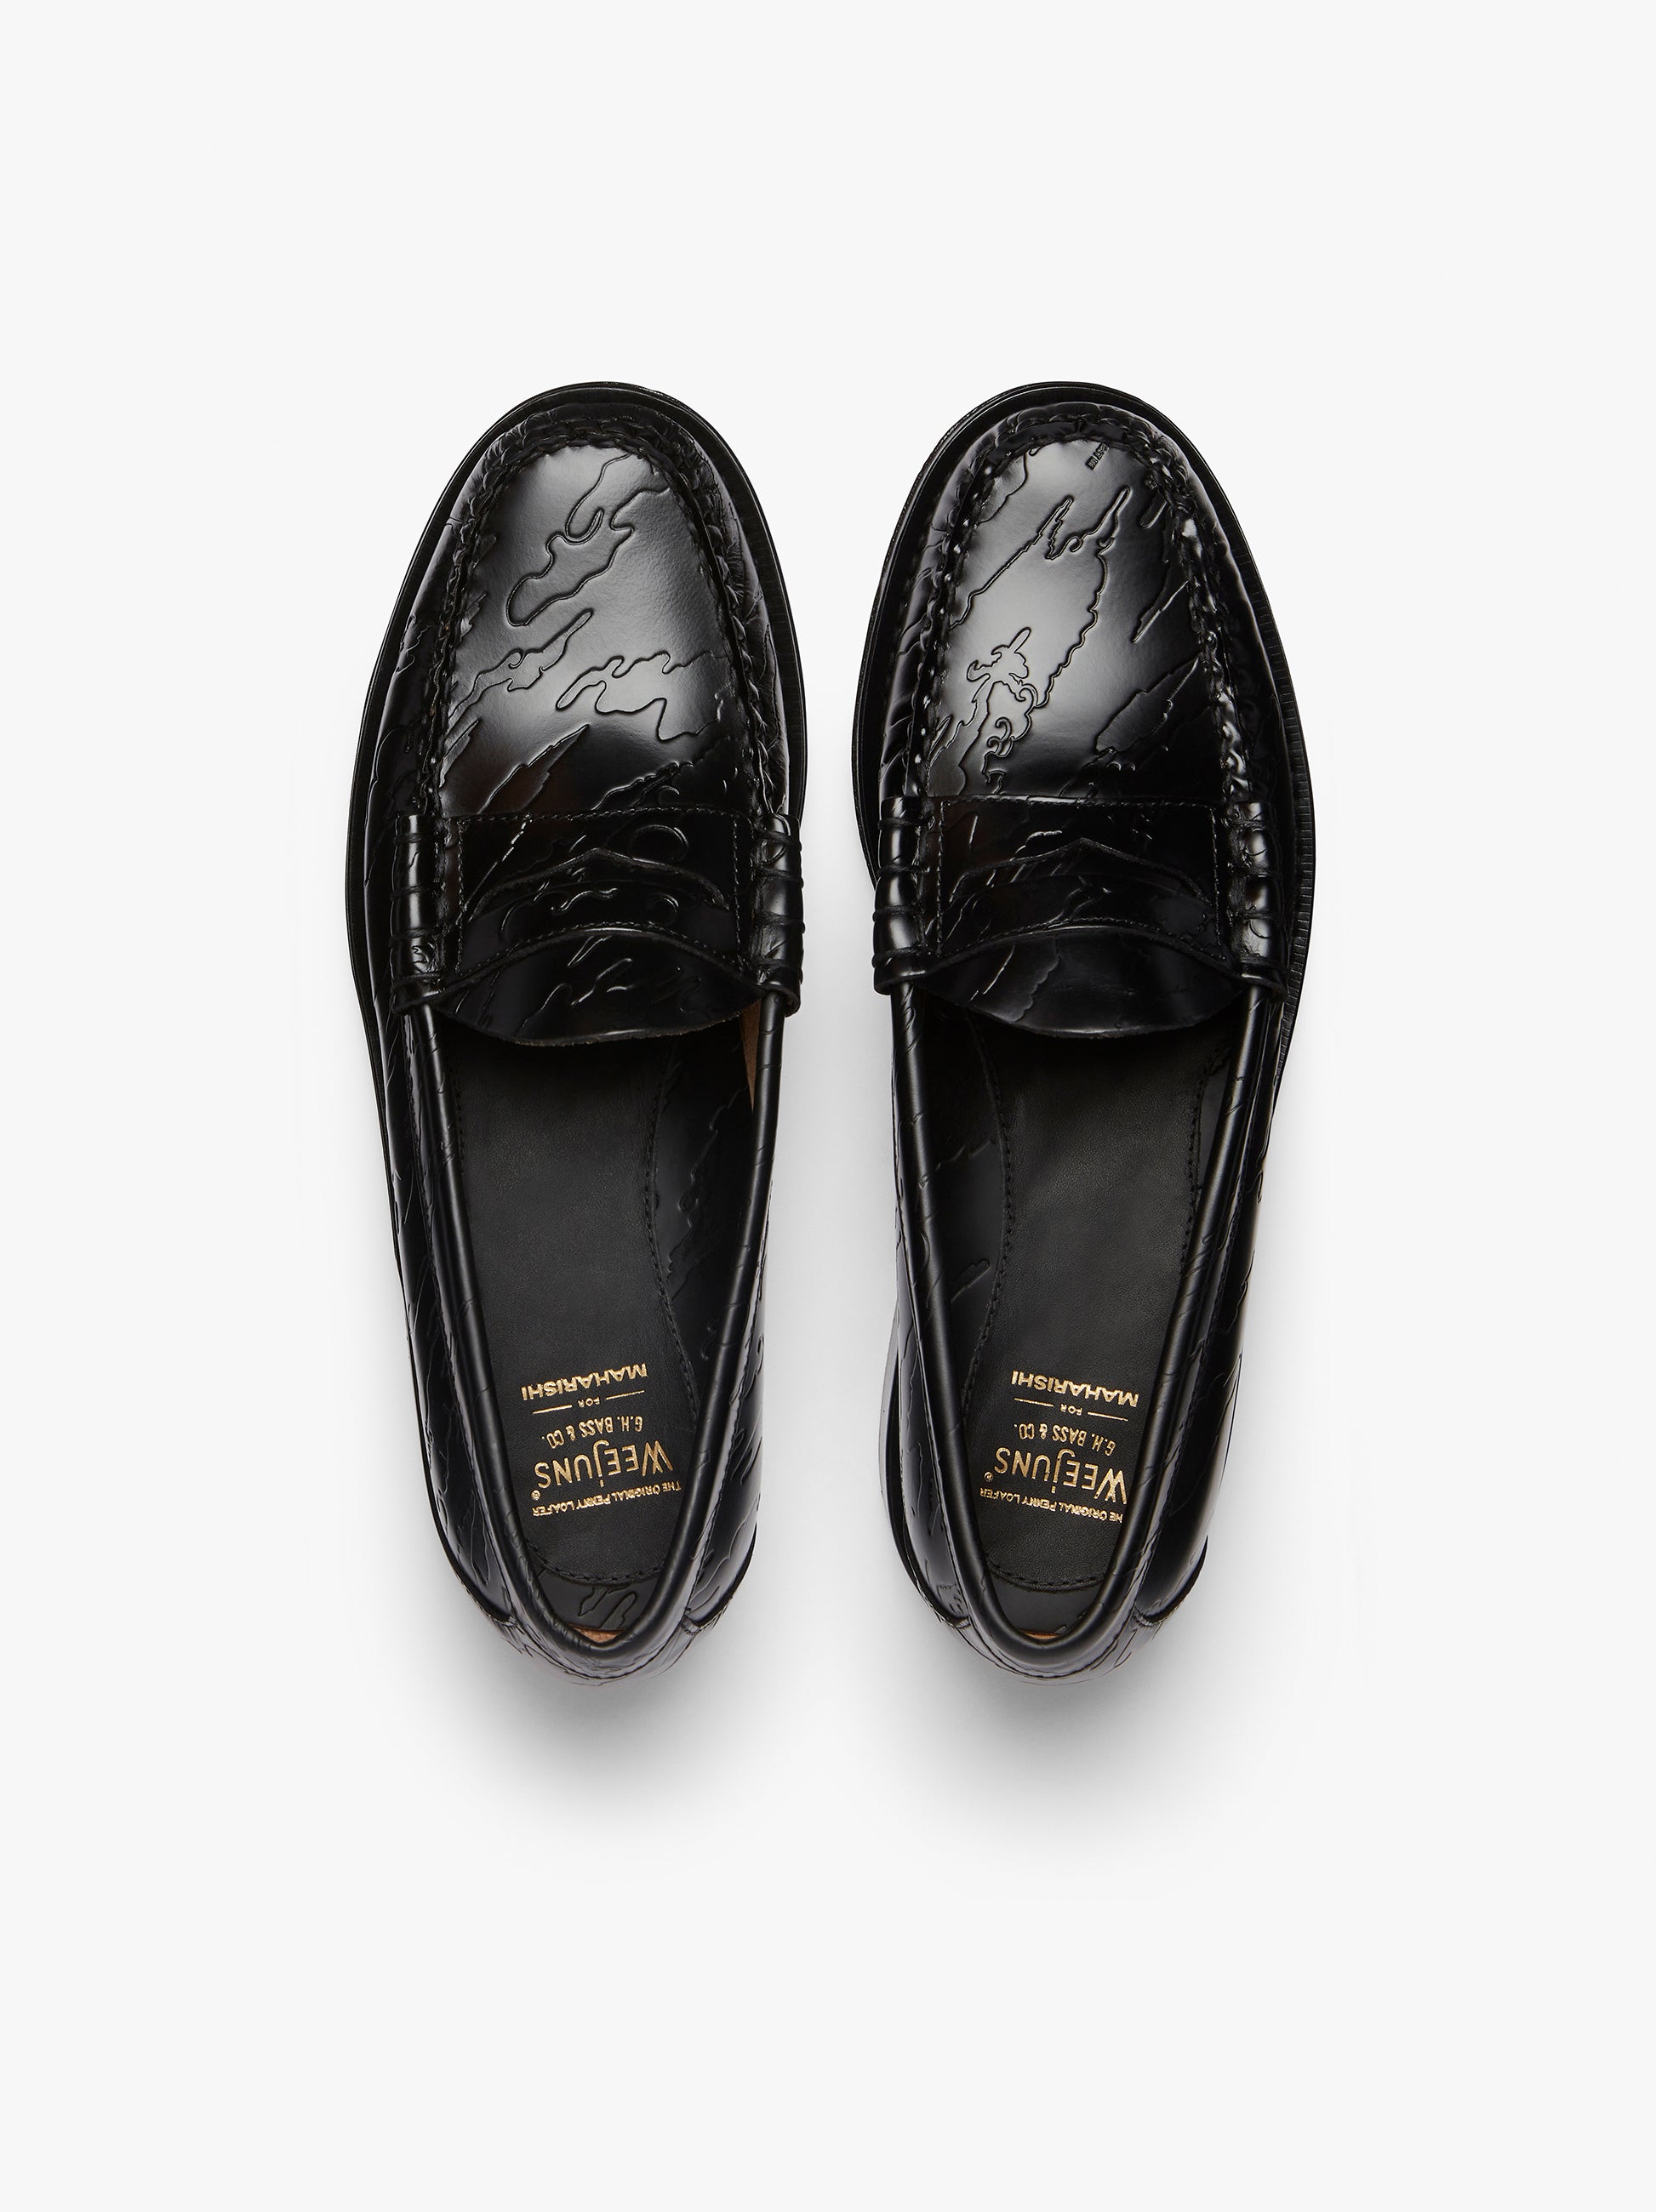 Maharishi Loafers | Embossed Black Leather Loafers – G.H.BASS 1876